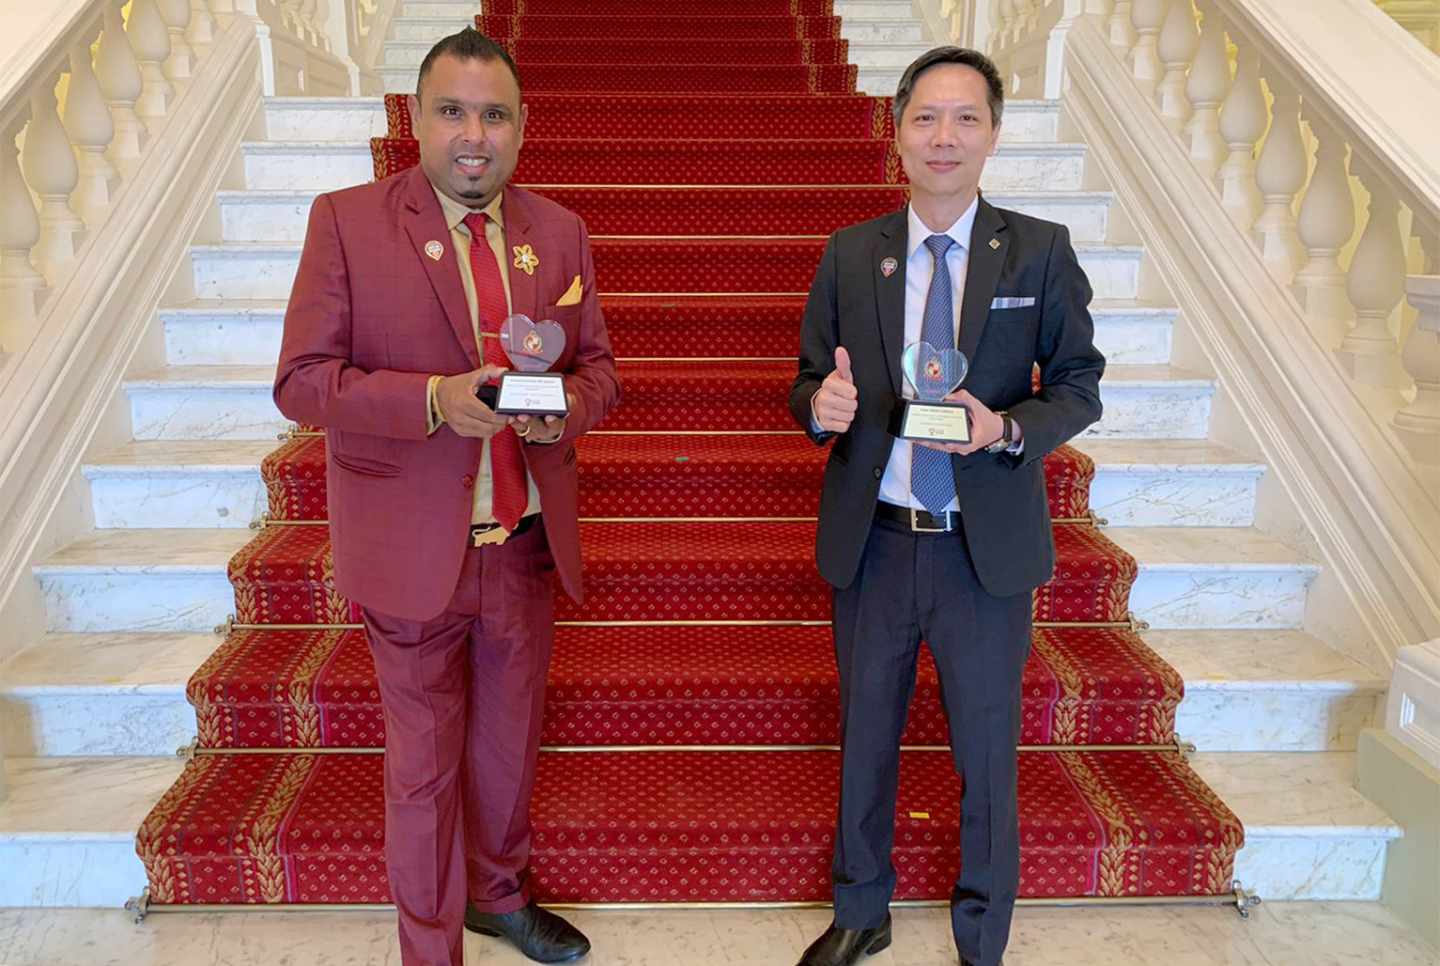 Pastor Samuel (left) and Rev Ezekiel Tan (right), President of Hope Initiative Alliance (HIA) at the Istana with their awards on Friday, October 16. 